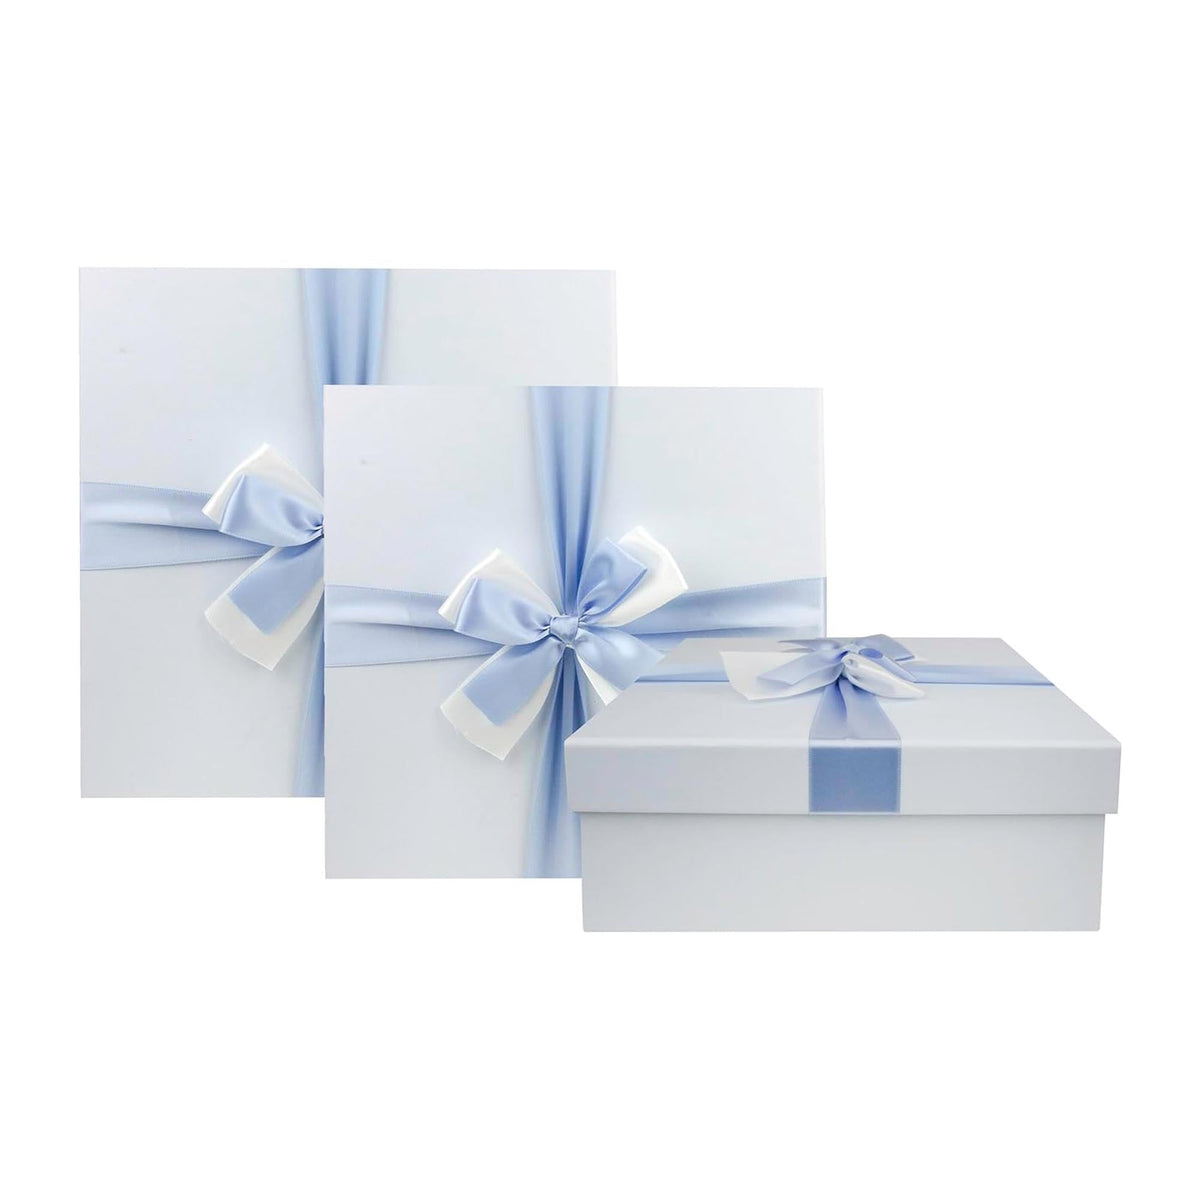 Luxury Baby Blue Gift Boxes - Set of 3 (Sizes Available)